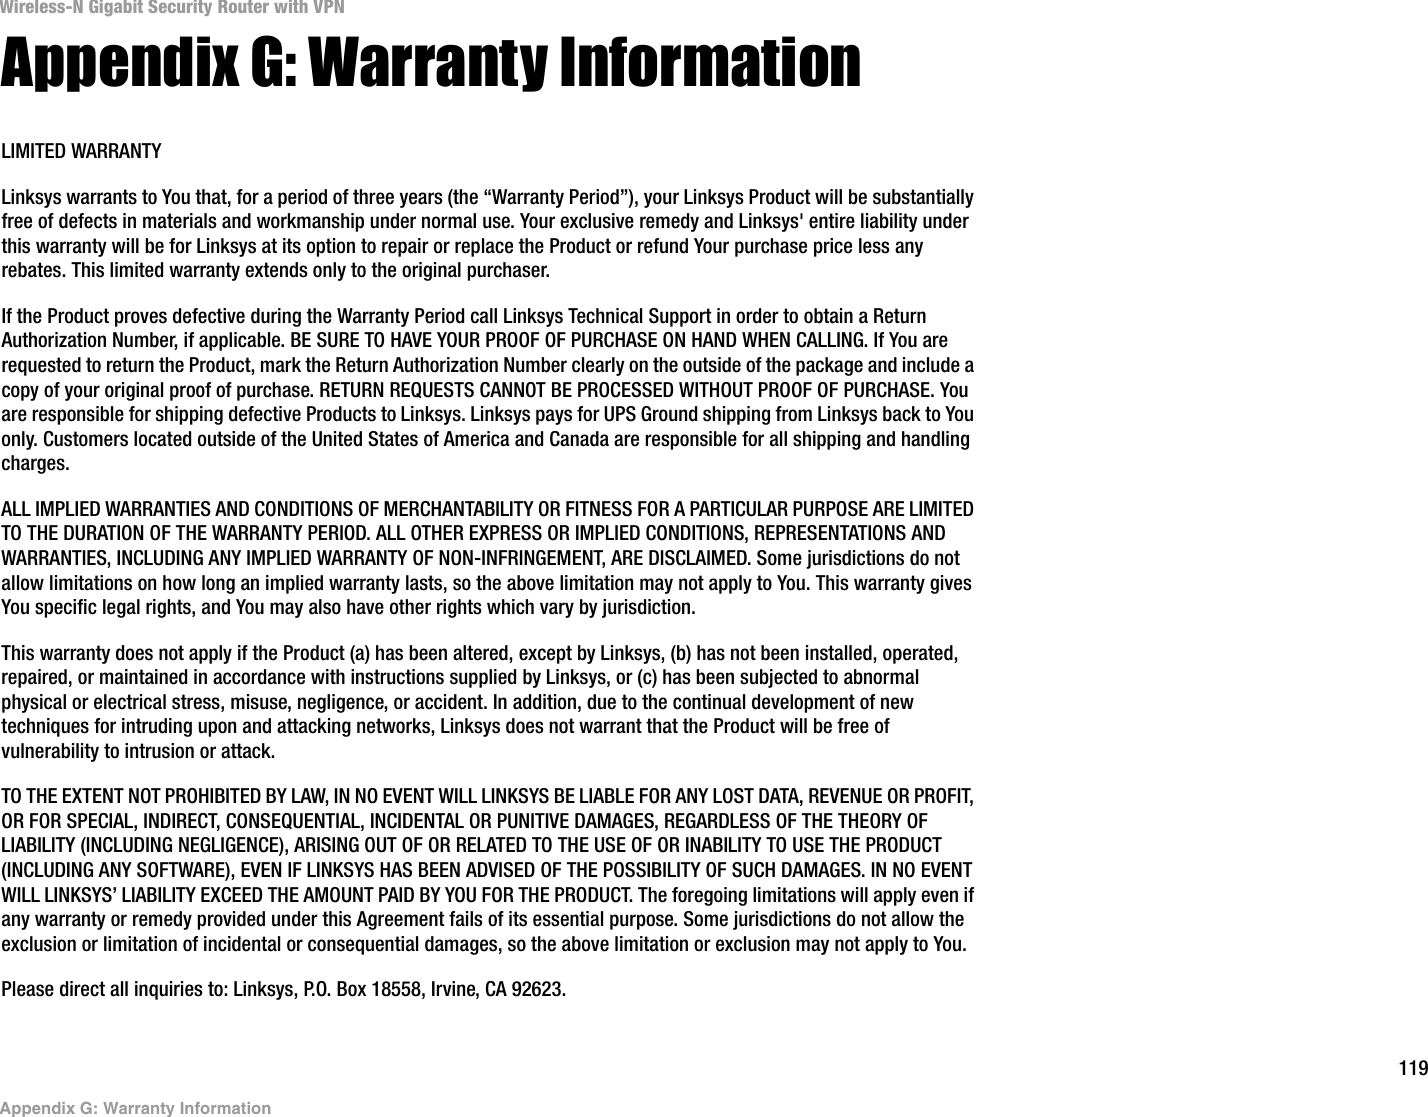 119Appendix G: Warranty InformationWireless-N Gigabit Security Router with VPNAppendix G: Warranty InformationLIMITED WARRANTYLinksys warrants to You that, for a period of three years (the “Warranty Period”), your Linksys Product will be substantially free of defects in materials and workmanship under normal use. Your exclusive remedy and Linksys&apos; entire liability under this warranty will be for Linksys at its option to repair or replace the Product or refund Your purchase price less any rebates. This limited warranty extends only to the original purchaser. If the Product proves defective during the Warranty Period call Linksys Technical Support in order to obtain a Return Authorization Number, if applicable. BE SURE TO HAVE YOUR PROOF OF PURCHASE ON HAND WHEN CALLING. If You are requested to return the Product, mark the Return Authorization Number clearly on the outside of the package and include a copy of your original proof of purchase. RETURN REQUESTS CANNOT BE PROCESSED WITHOUT PROOF OF PURCHASE. You are responsible for shipping defective Products to Linksys. Linksys pays for UPS Ground shipping from Linksys back to You only. Customers located outside of the United States of America and Canada are responsible for all shipping and handling charges. ALL IMPLIED WARRANTIES AND CONDITIONS OF MERCHANTABILITY OR FITNESS FOR A PARTICULAR PURPOSE ARE LIMITED TO THE DURATION OF THE WARRANTY PERIOD. ALL OTHER EXPRESS OR IMPLIED CONDITIONS, REPRESENTATIONS AND WARRANTIES, INCLUDING ANY IMPLIED WARRANTY OF NON-INFRINGEMENT, ARE DISCLAIMED. Some jurisdictions do not allow limitations on how long an implied warranty lasts, so the above limitation may not apply to You. This warranty gives You specific legal rights, and You may also have other rights which vary by jurisdiction.This warranty does not apply if the Product (a) has been altered, except by Linksys, (b) has not been installed, operated, repaired, or maintained in accordance with instructions supplied by Linksys, or (c) has been subjected to abnormal physical or electrical stress, misuse, negligence, or accident. In addition, due to the continual development of new techniques for intruding upon and attacking networks, Linksys does not warrant that the Product will be free of vulnerability to intrusion or attack.TO THE EXTENT NOT PROHIBITED BY LAW, IN NO EVENT WILL LINKSYS BE LIABLE FOR ANY LOST DATA, REVENUE OR PROFIT, OR FOR SPECIAL, INDIRECT, CONSEQUENTIAL, INCIDENTAL OR PUNITIVE DAMAGES, REGARDLESS OF THE THEORY OF LIABILITY (INCLUDING NEGLIGENCE), ARISING OUT OF OR RELATED TO THE USE OF OR INABILITY TO USE THE PRODUCT (INCLUDING ANY SOFTWARE), EVEN IF LINKSYS HAS BEEN ADVISED OF THE POSSIBILITY OF SUCH DAMAGES. IN NO EVENT WILL LINKSYS’ LIABILITY EXCEED THE AMOUNT PAID BY YOU FOR THE PRODUCT. The foregoing limitations will apply even if any warranty or remedy provided under this Agreement fails of its essential purpose. Some jurisdictions do not allow the exclusion or limitation of incidental or consequential damages, so the above limitation or exclusion may not apply to You.Please direct all inquiries to: Linksys, P.O. Box 18558, Irvine, CA 92623.